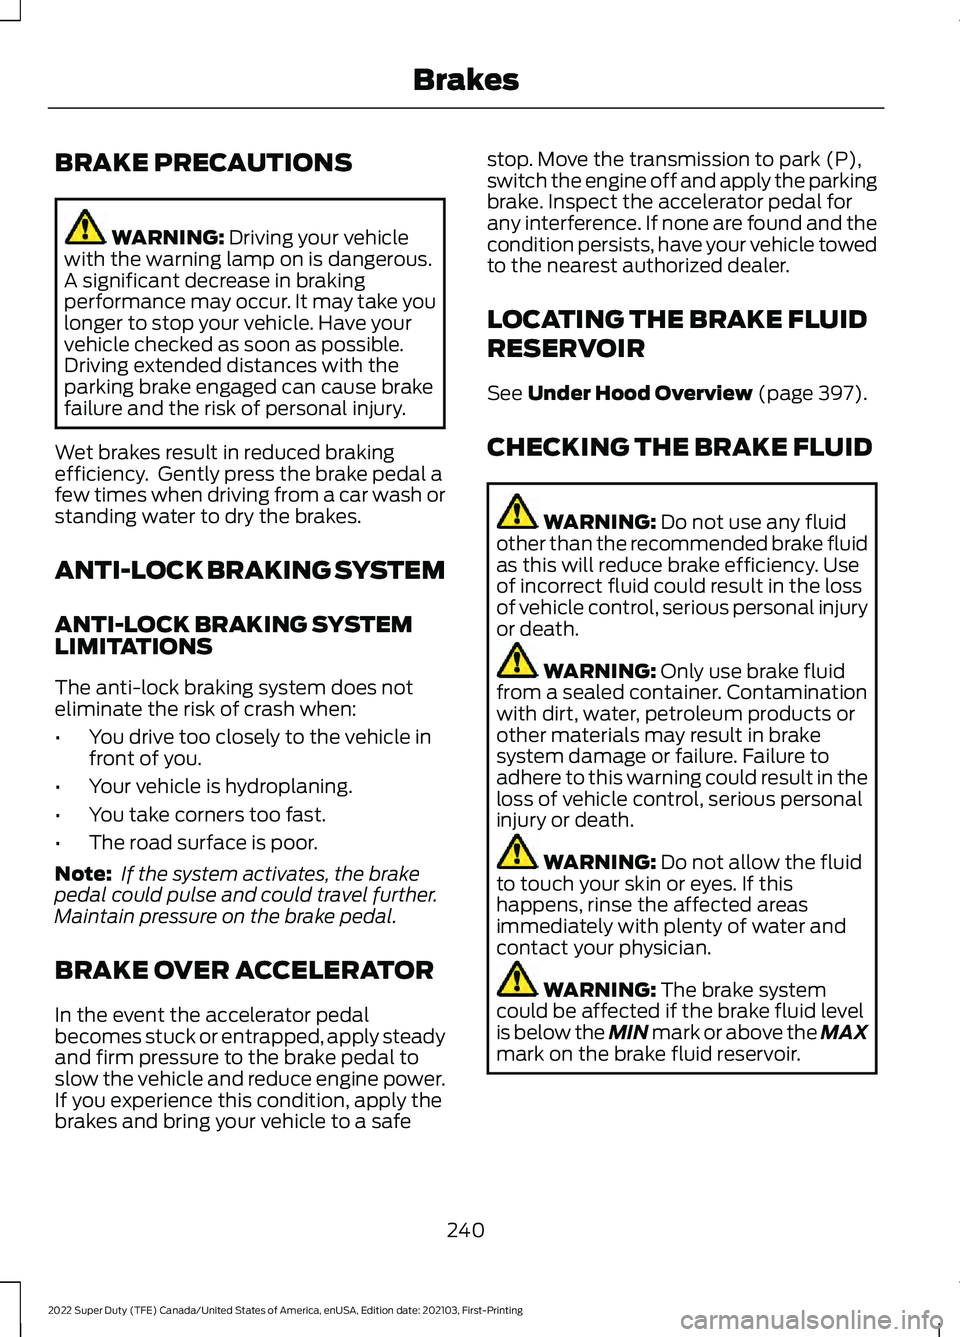 FORD F-600 2022  Owners Manual BRAKE PRECAUTIONS
WARNING: Driving your vehicle
with the warning lamp on is dangerous.
A significant decrease in braking
performance may occur. It may take you
longer to stop your vehicle. Have your
v